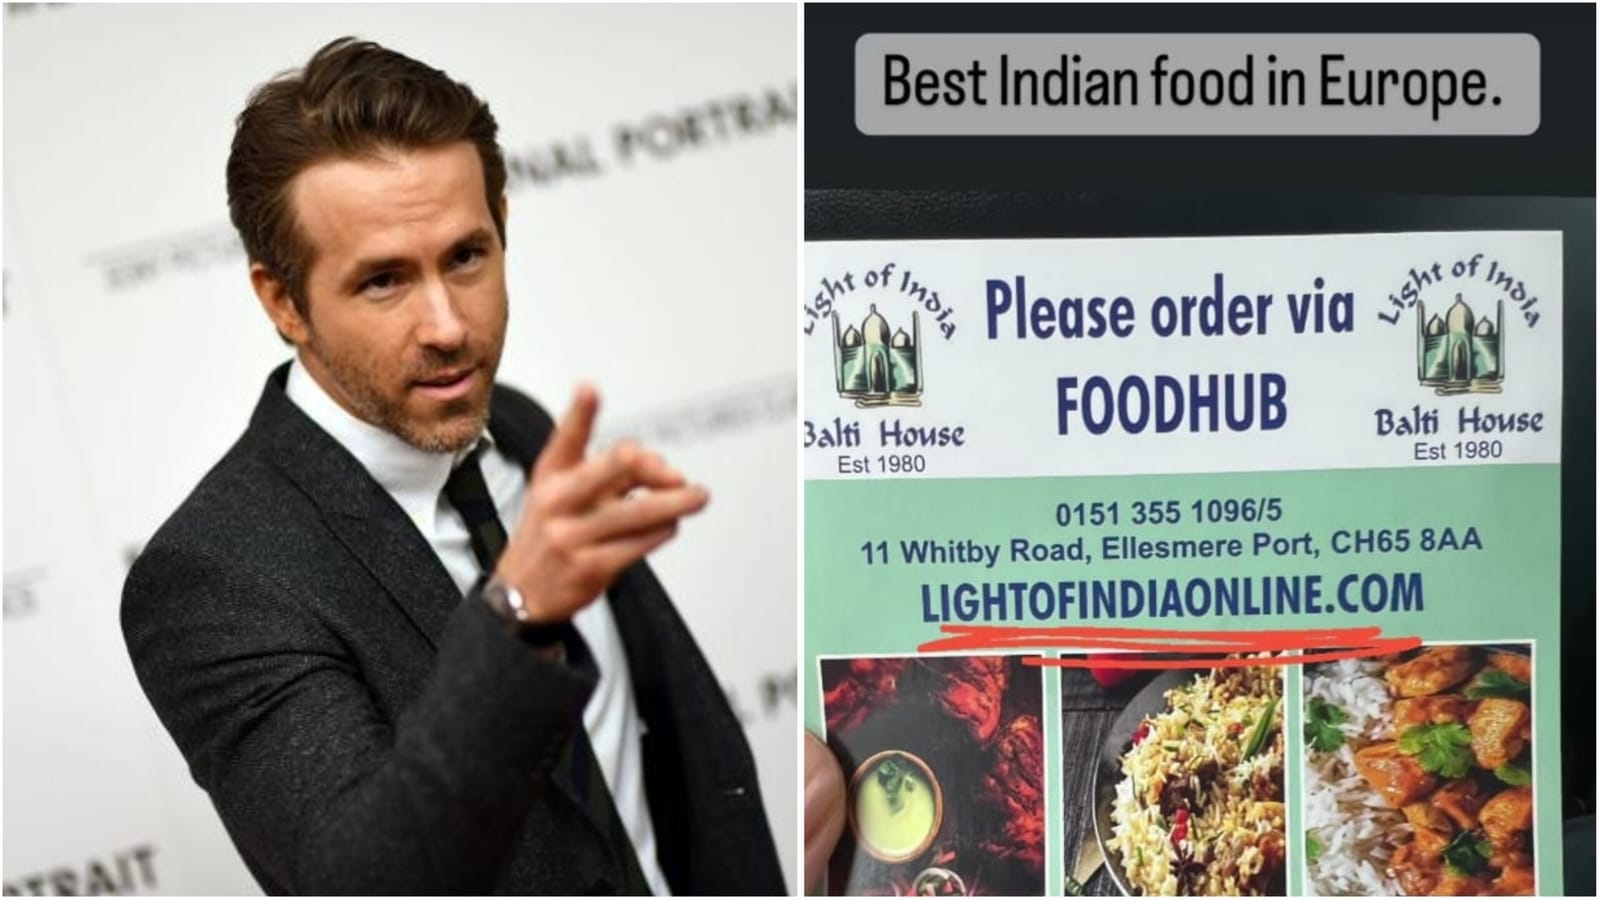 ryan-reynolds-endorsement-of-best-indian-food-in-europe-makes-small-restaurant-famous-bookings-off-the-scale